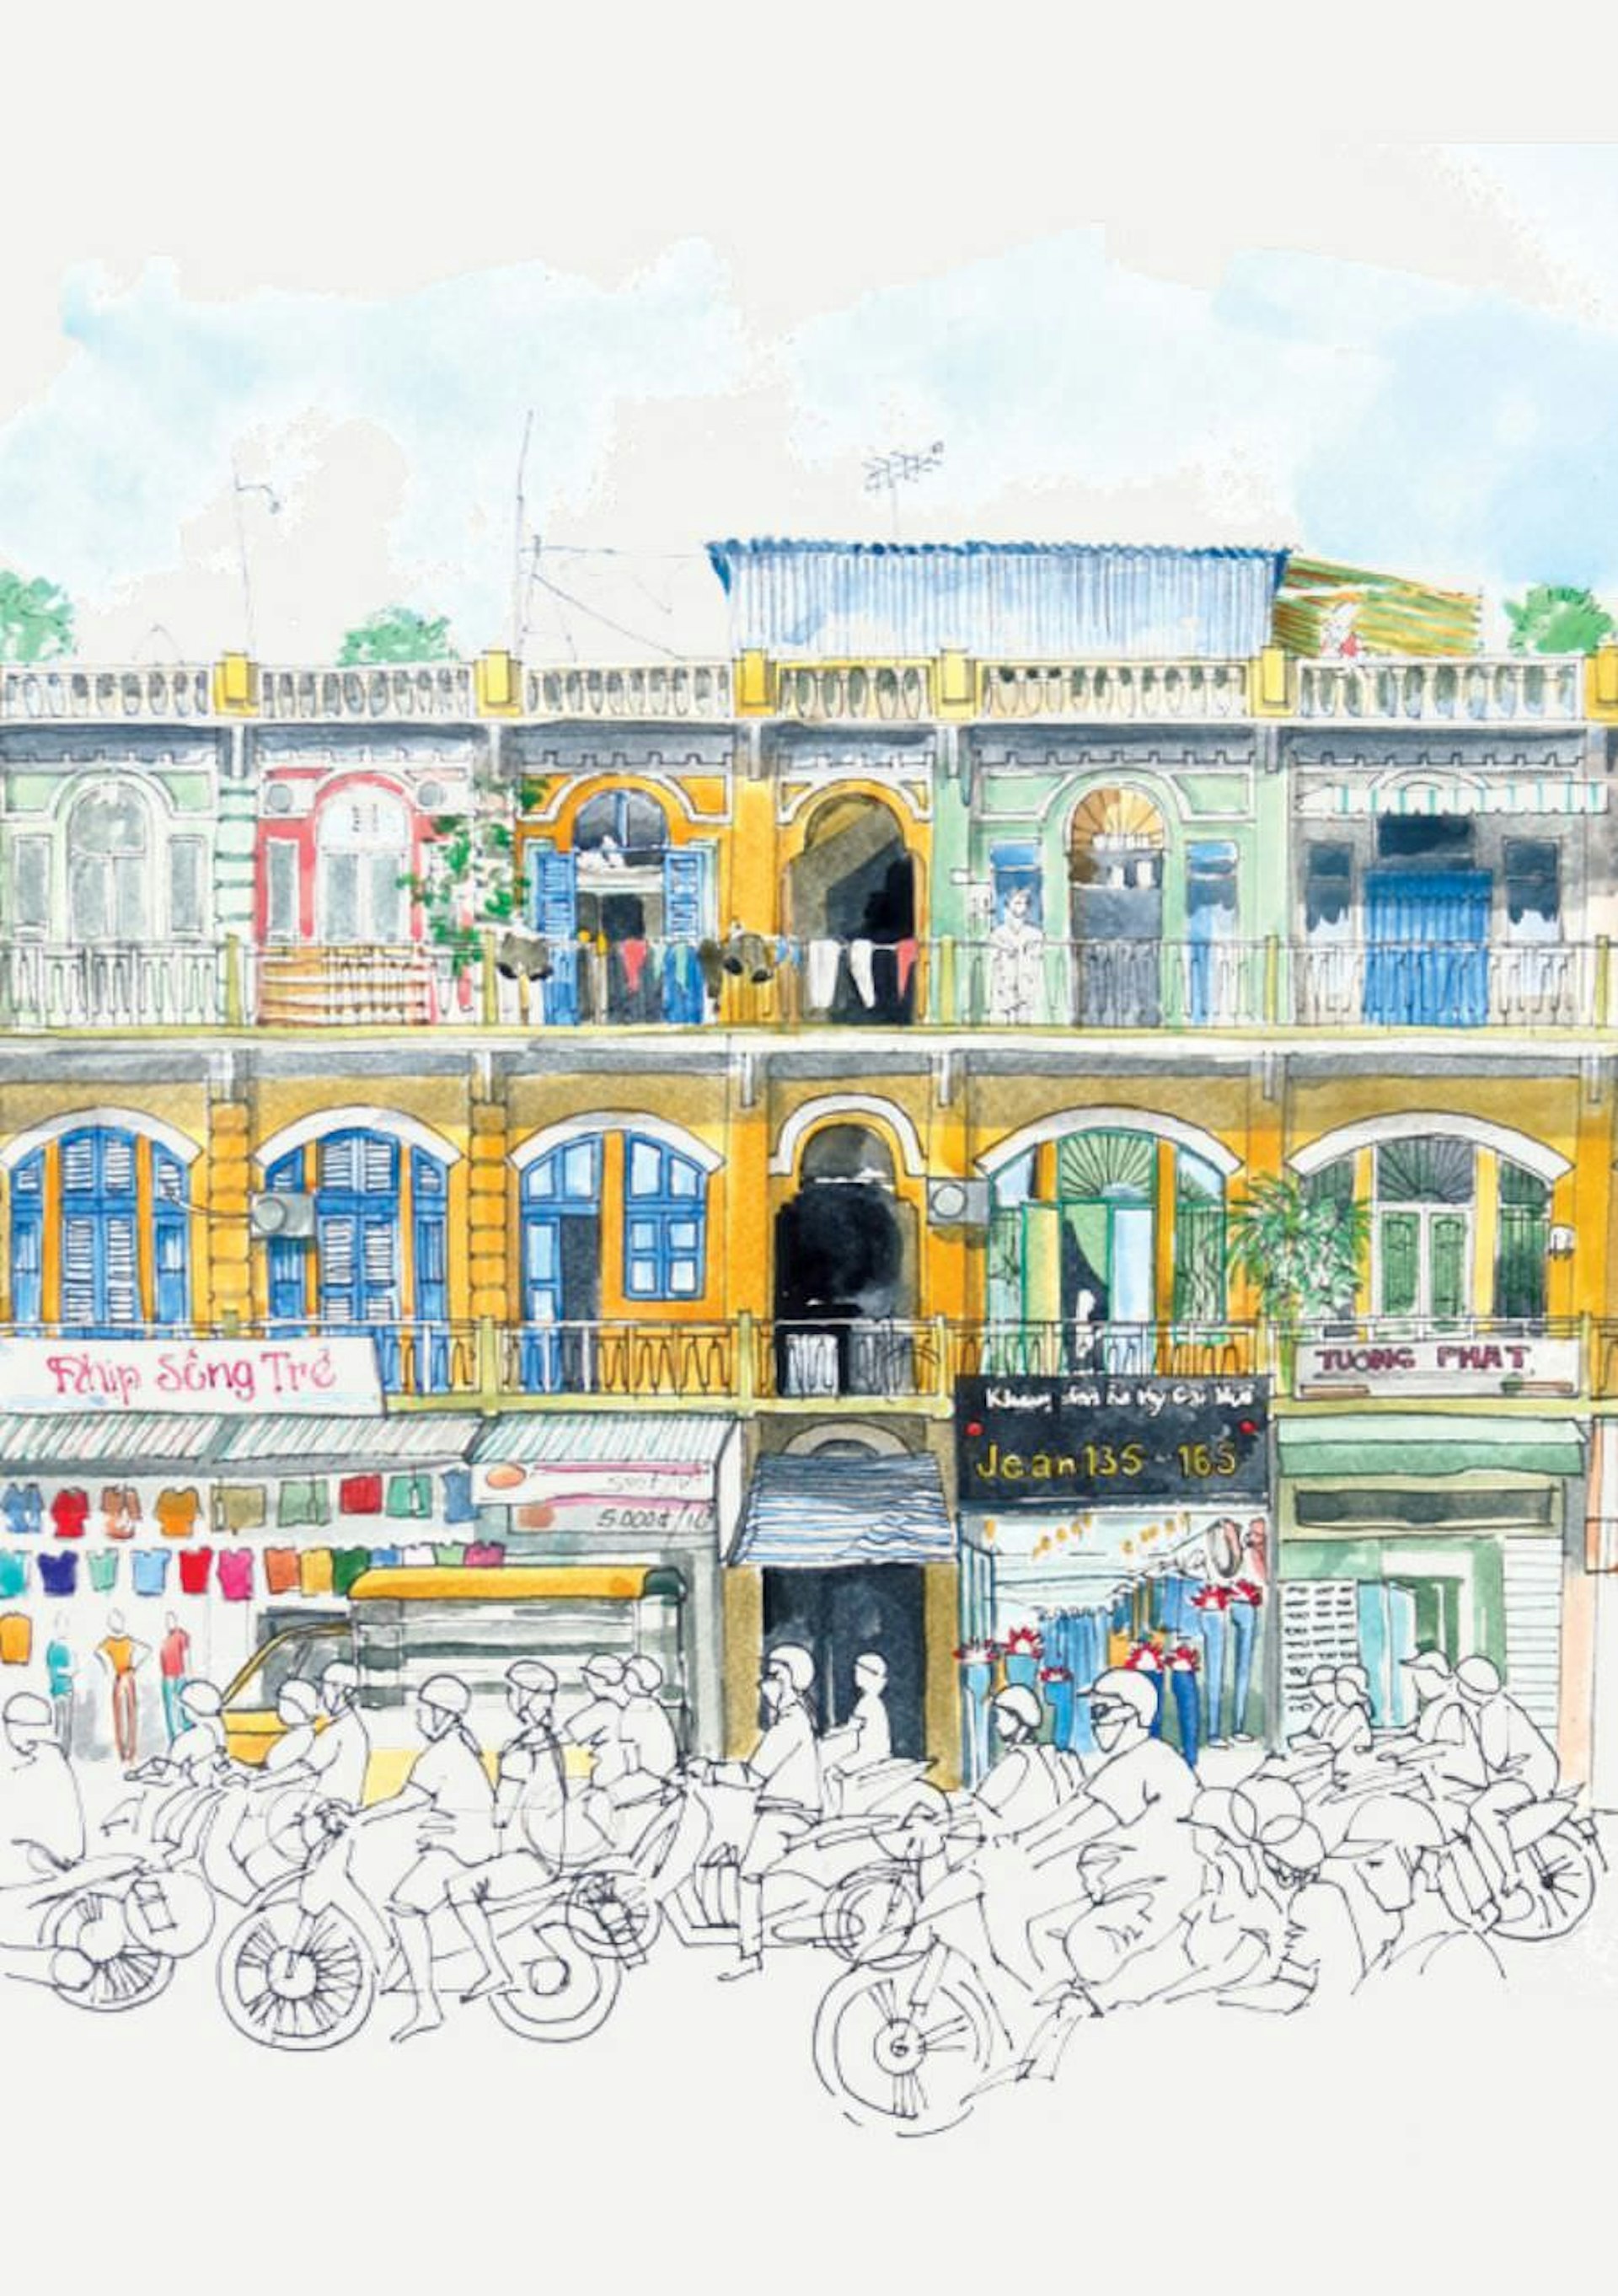 A line and watercolour scene showing yellow and blue multi-storey buildings in Vietnam, with sketches of motorbike riders forming a monochrome row in front of the buildings, an artwork made by Vietnam-based creator Bridget March